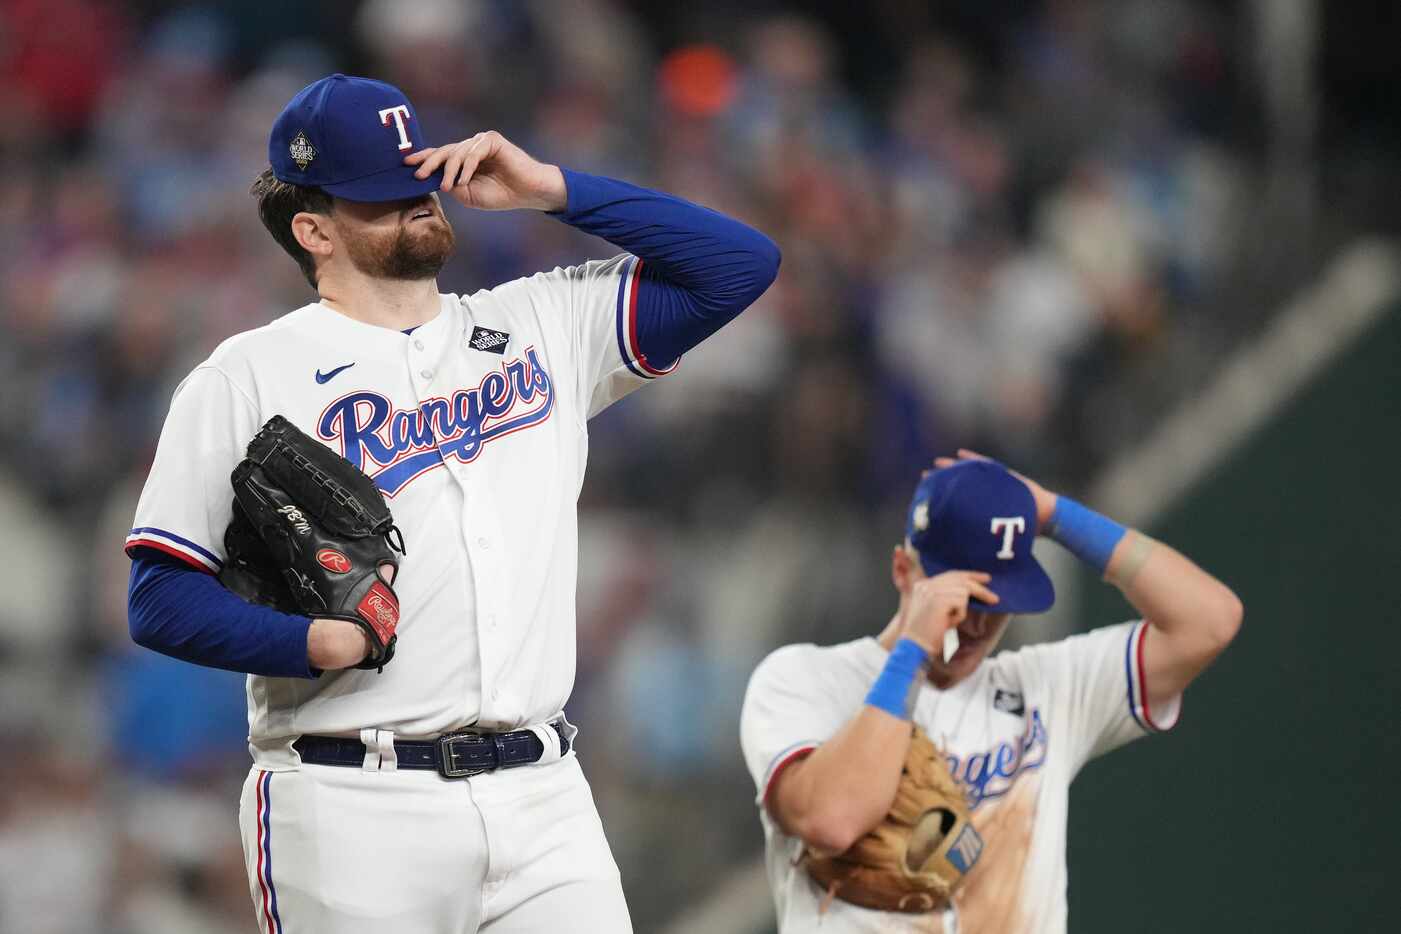 Texas Rangers starting pitcher Jordan Montgomery reacts as manager Bruce Bochy comes to...